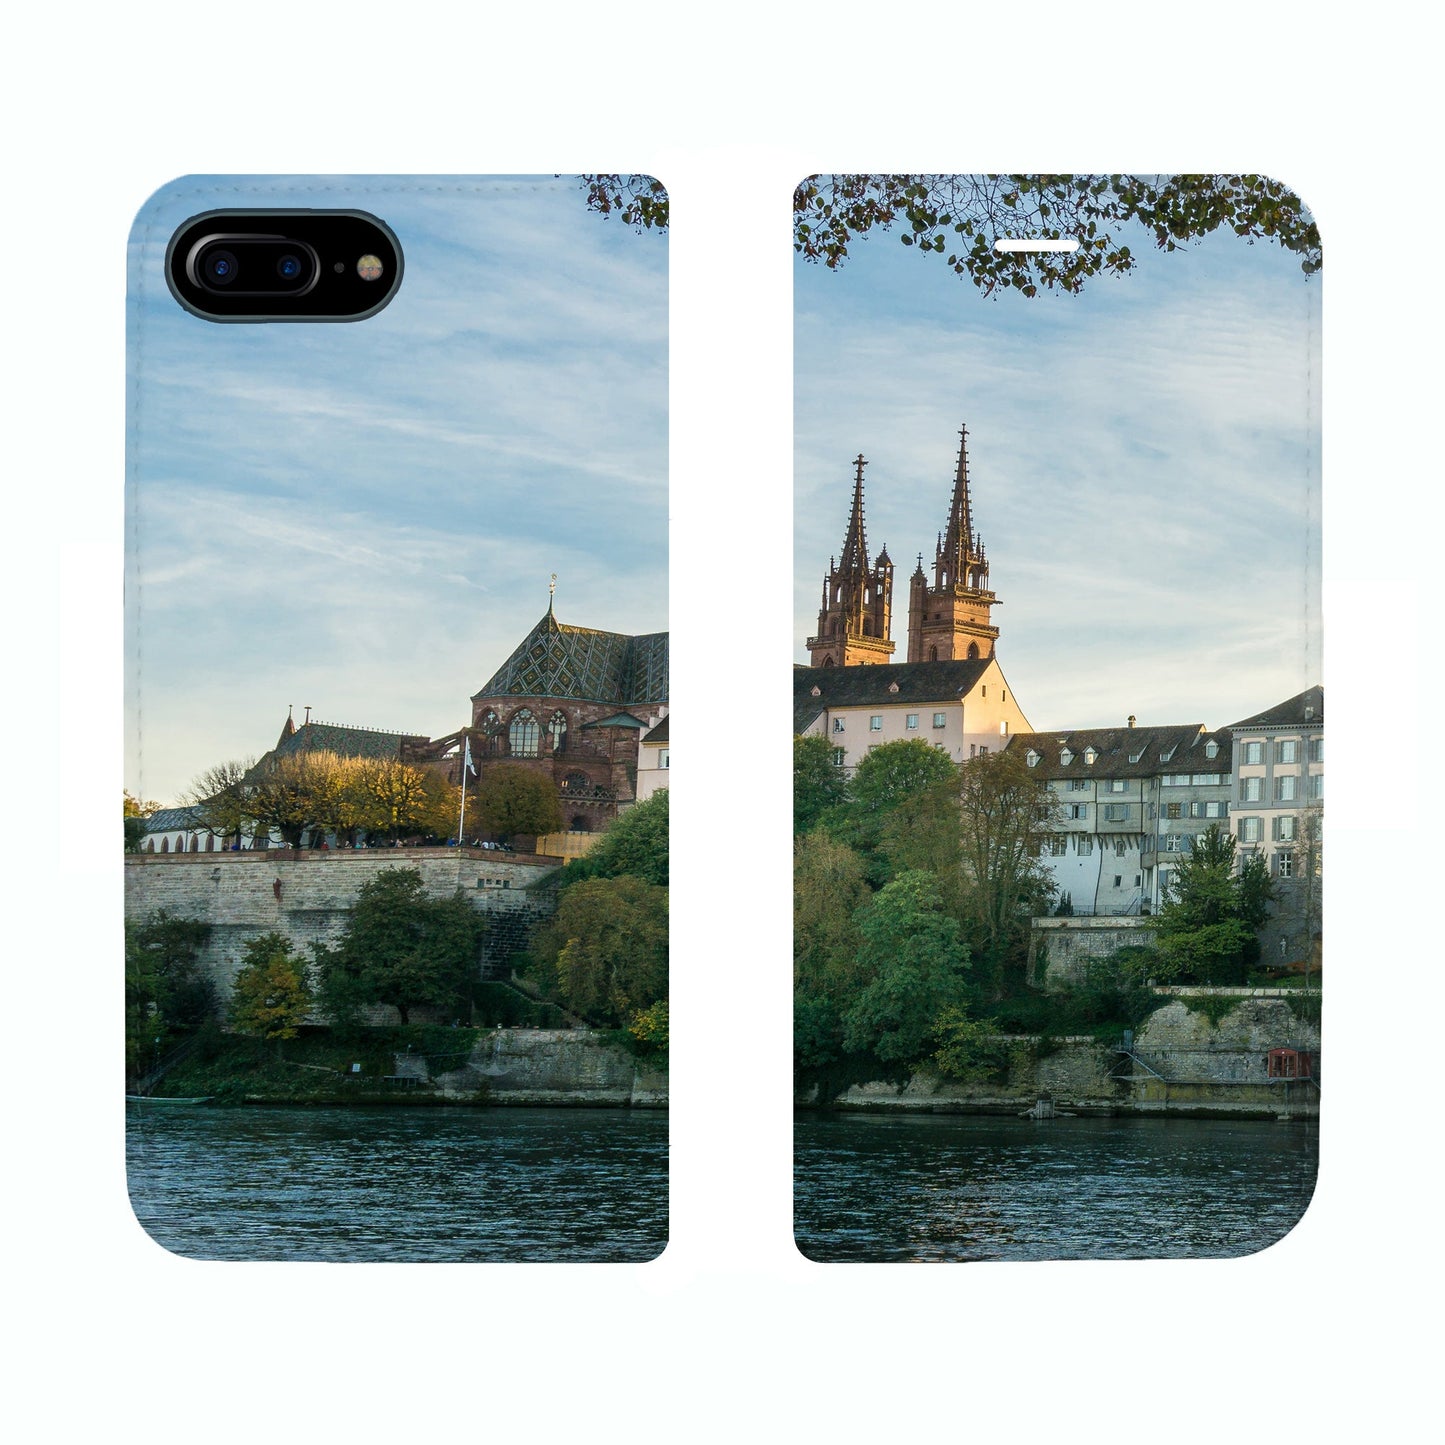 Basel City Rhine Panorama Case for iPhone 6/6S/7/8 Plus